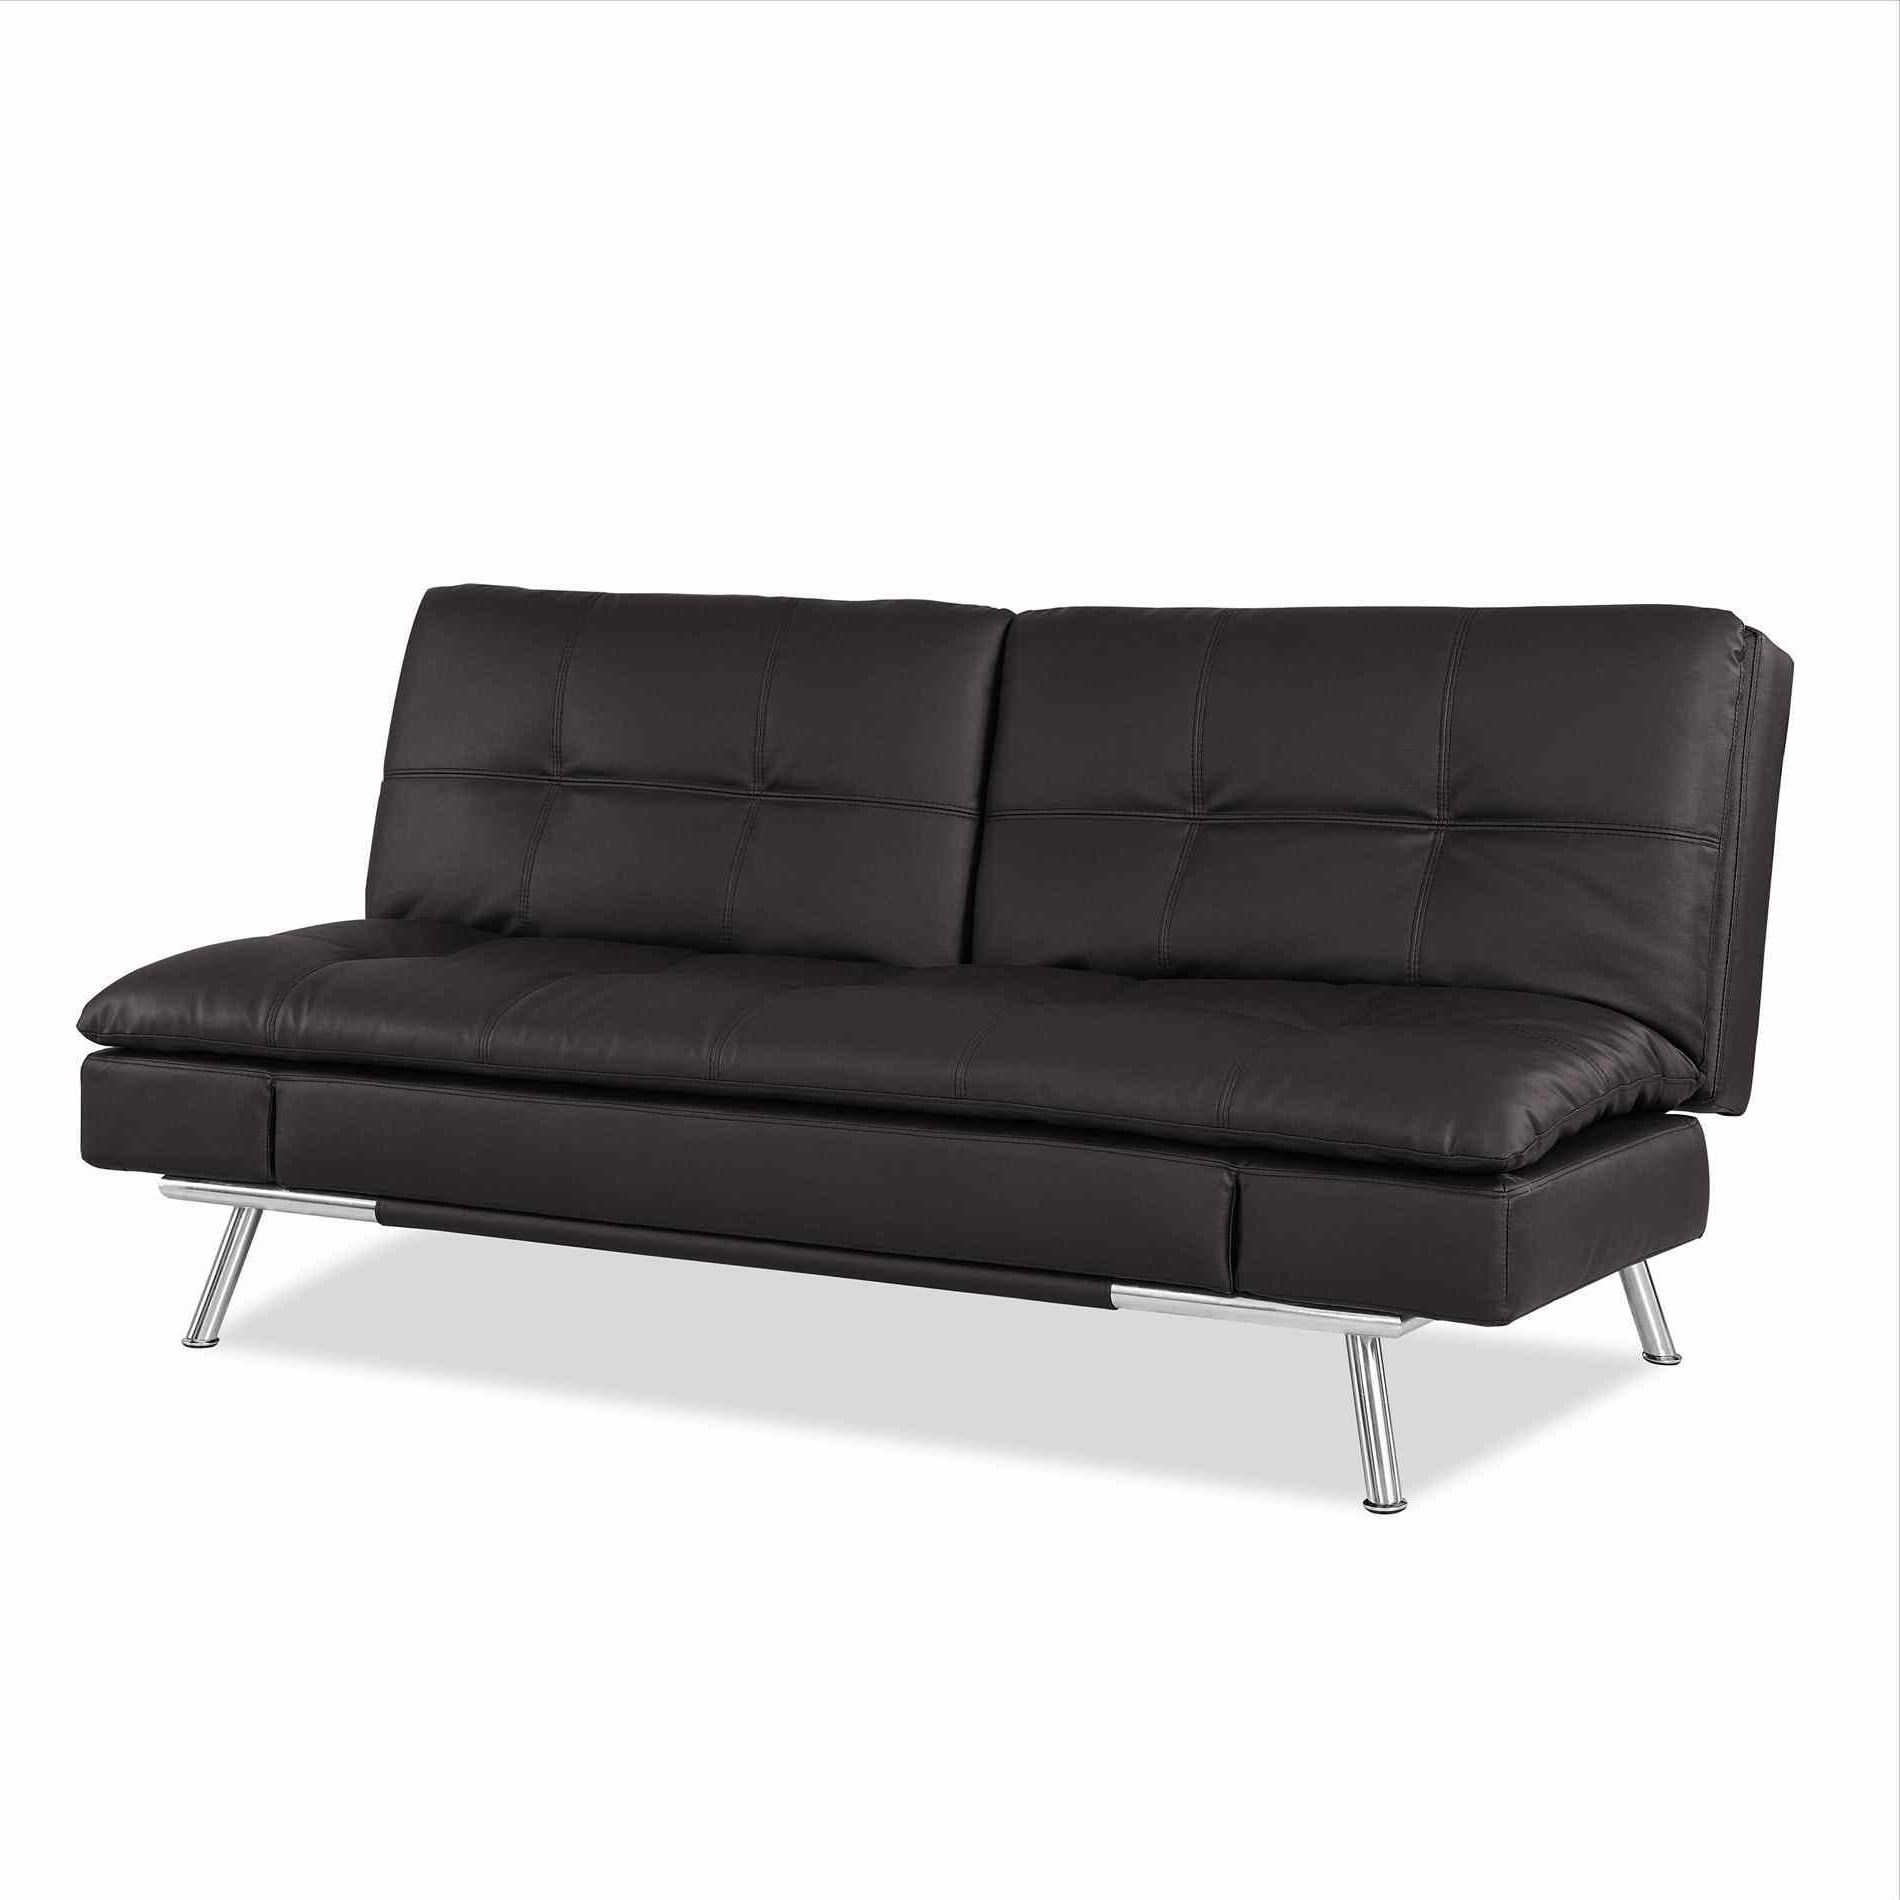 Houzz Sectional Sofas For Trendy Sofa : Sectional S Houzz Iascorg Chairs Xqnlinfo Chairs Black Sofa (View 18 of 20)